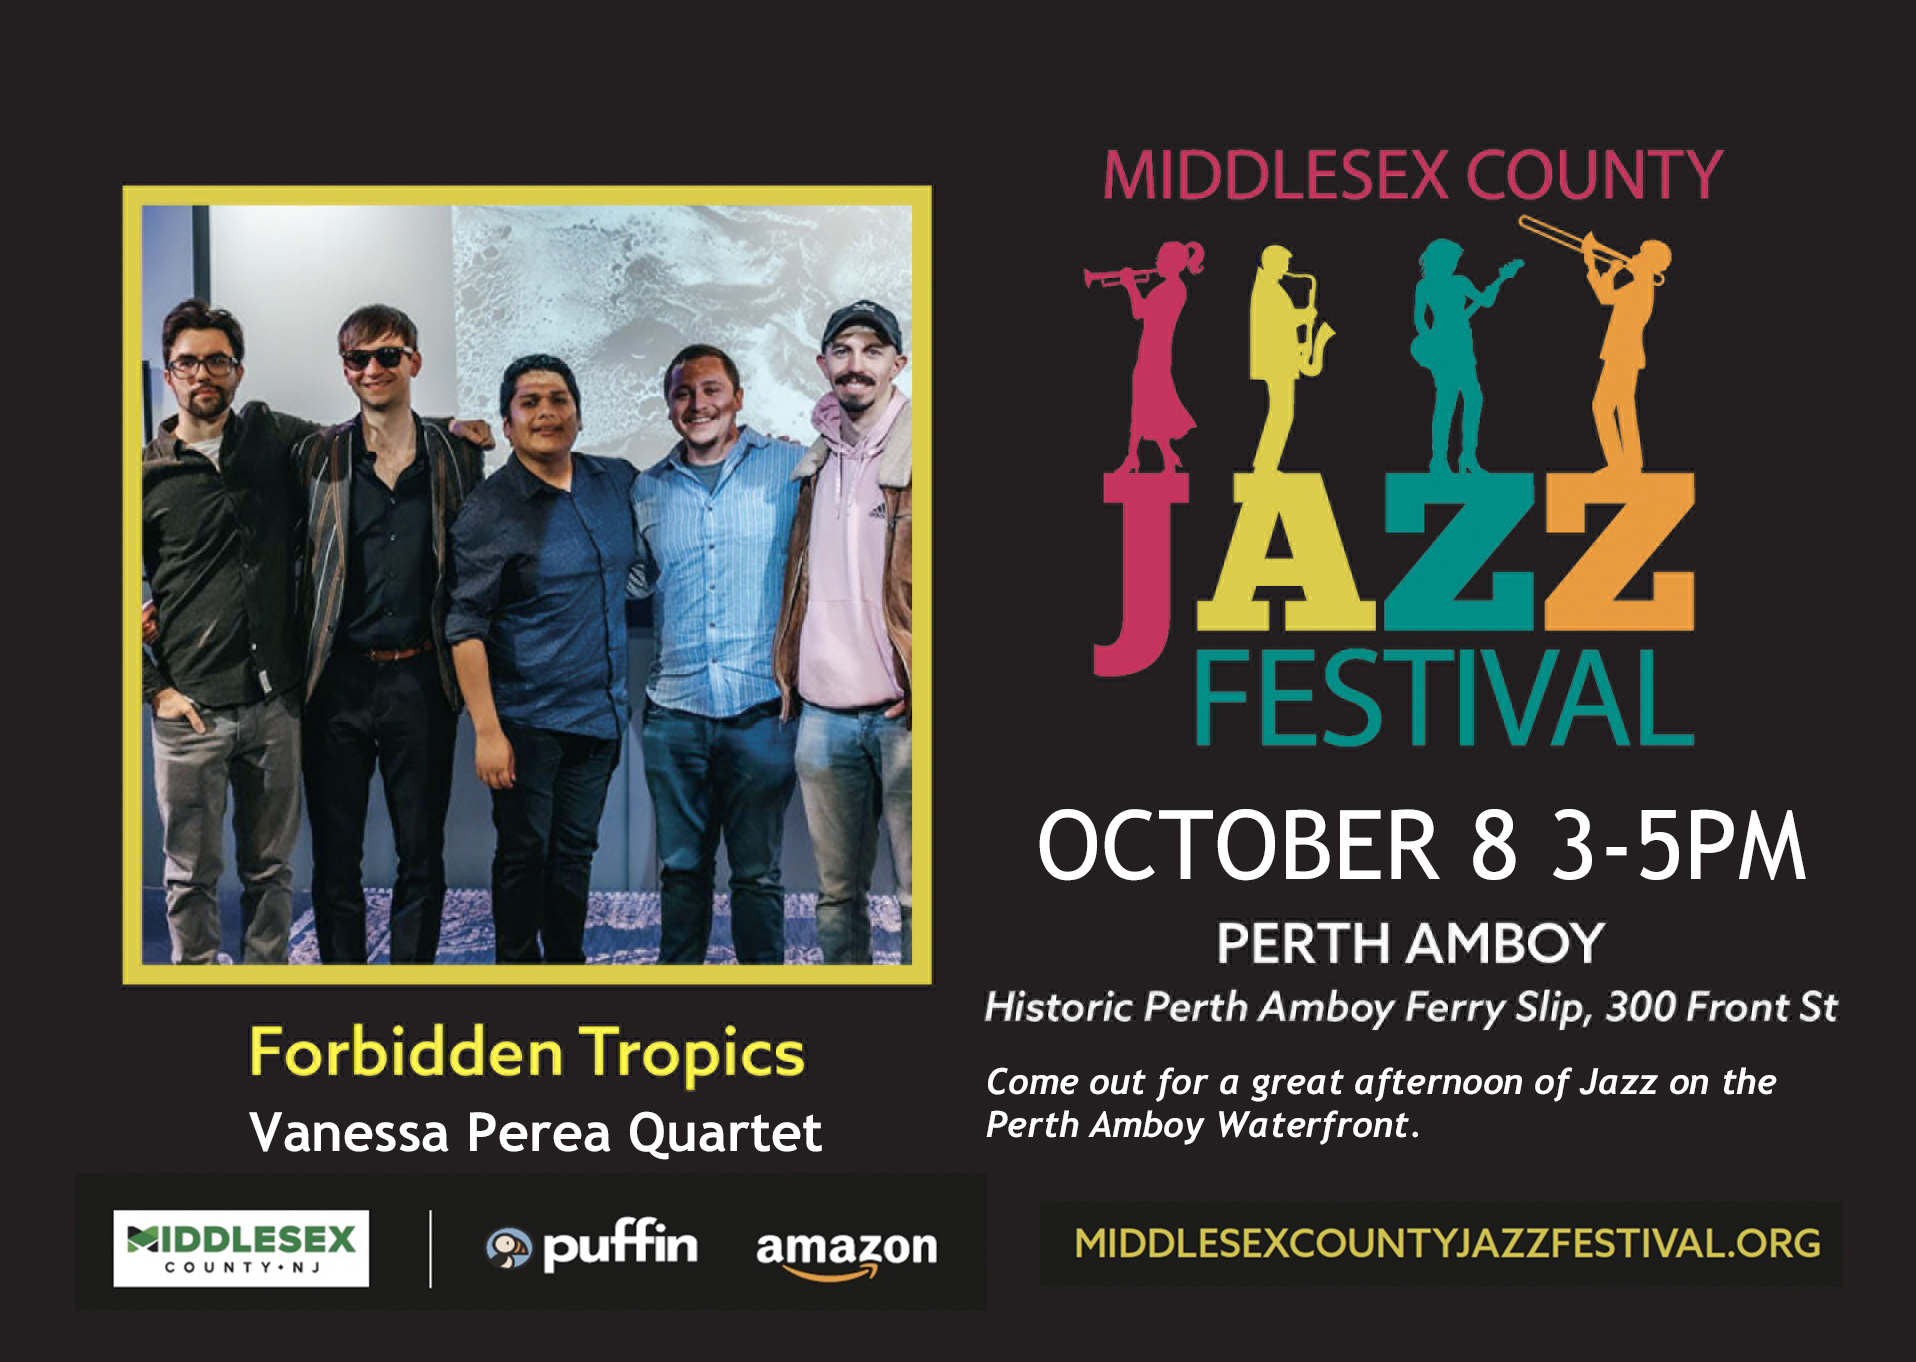 Middlesex County Jazz Festival in Perth Amboy